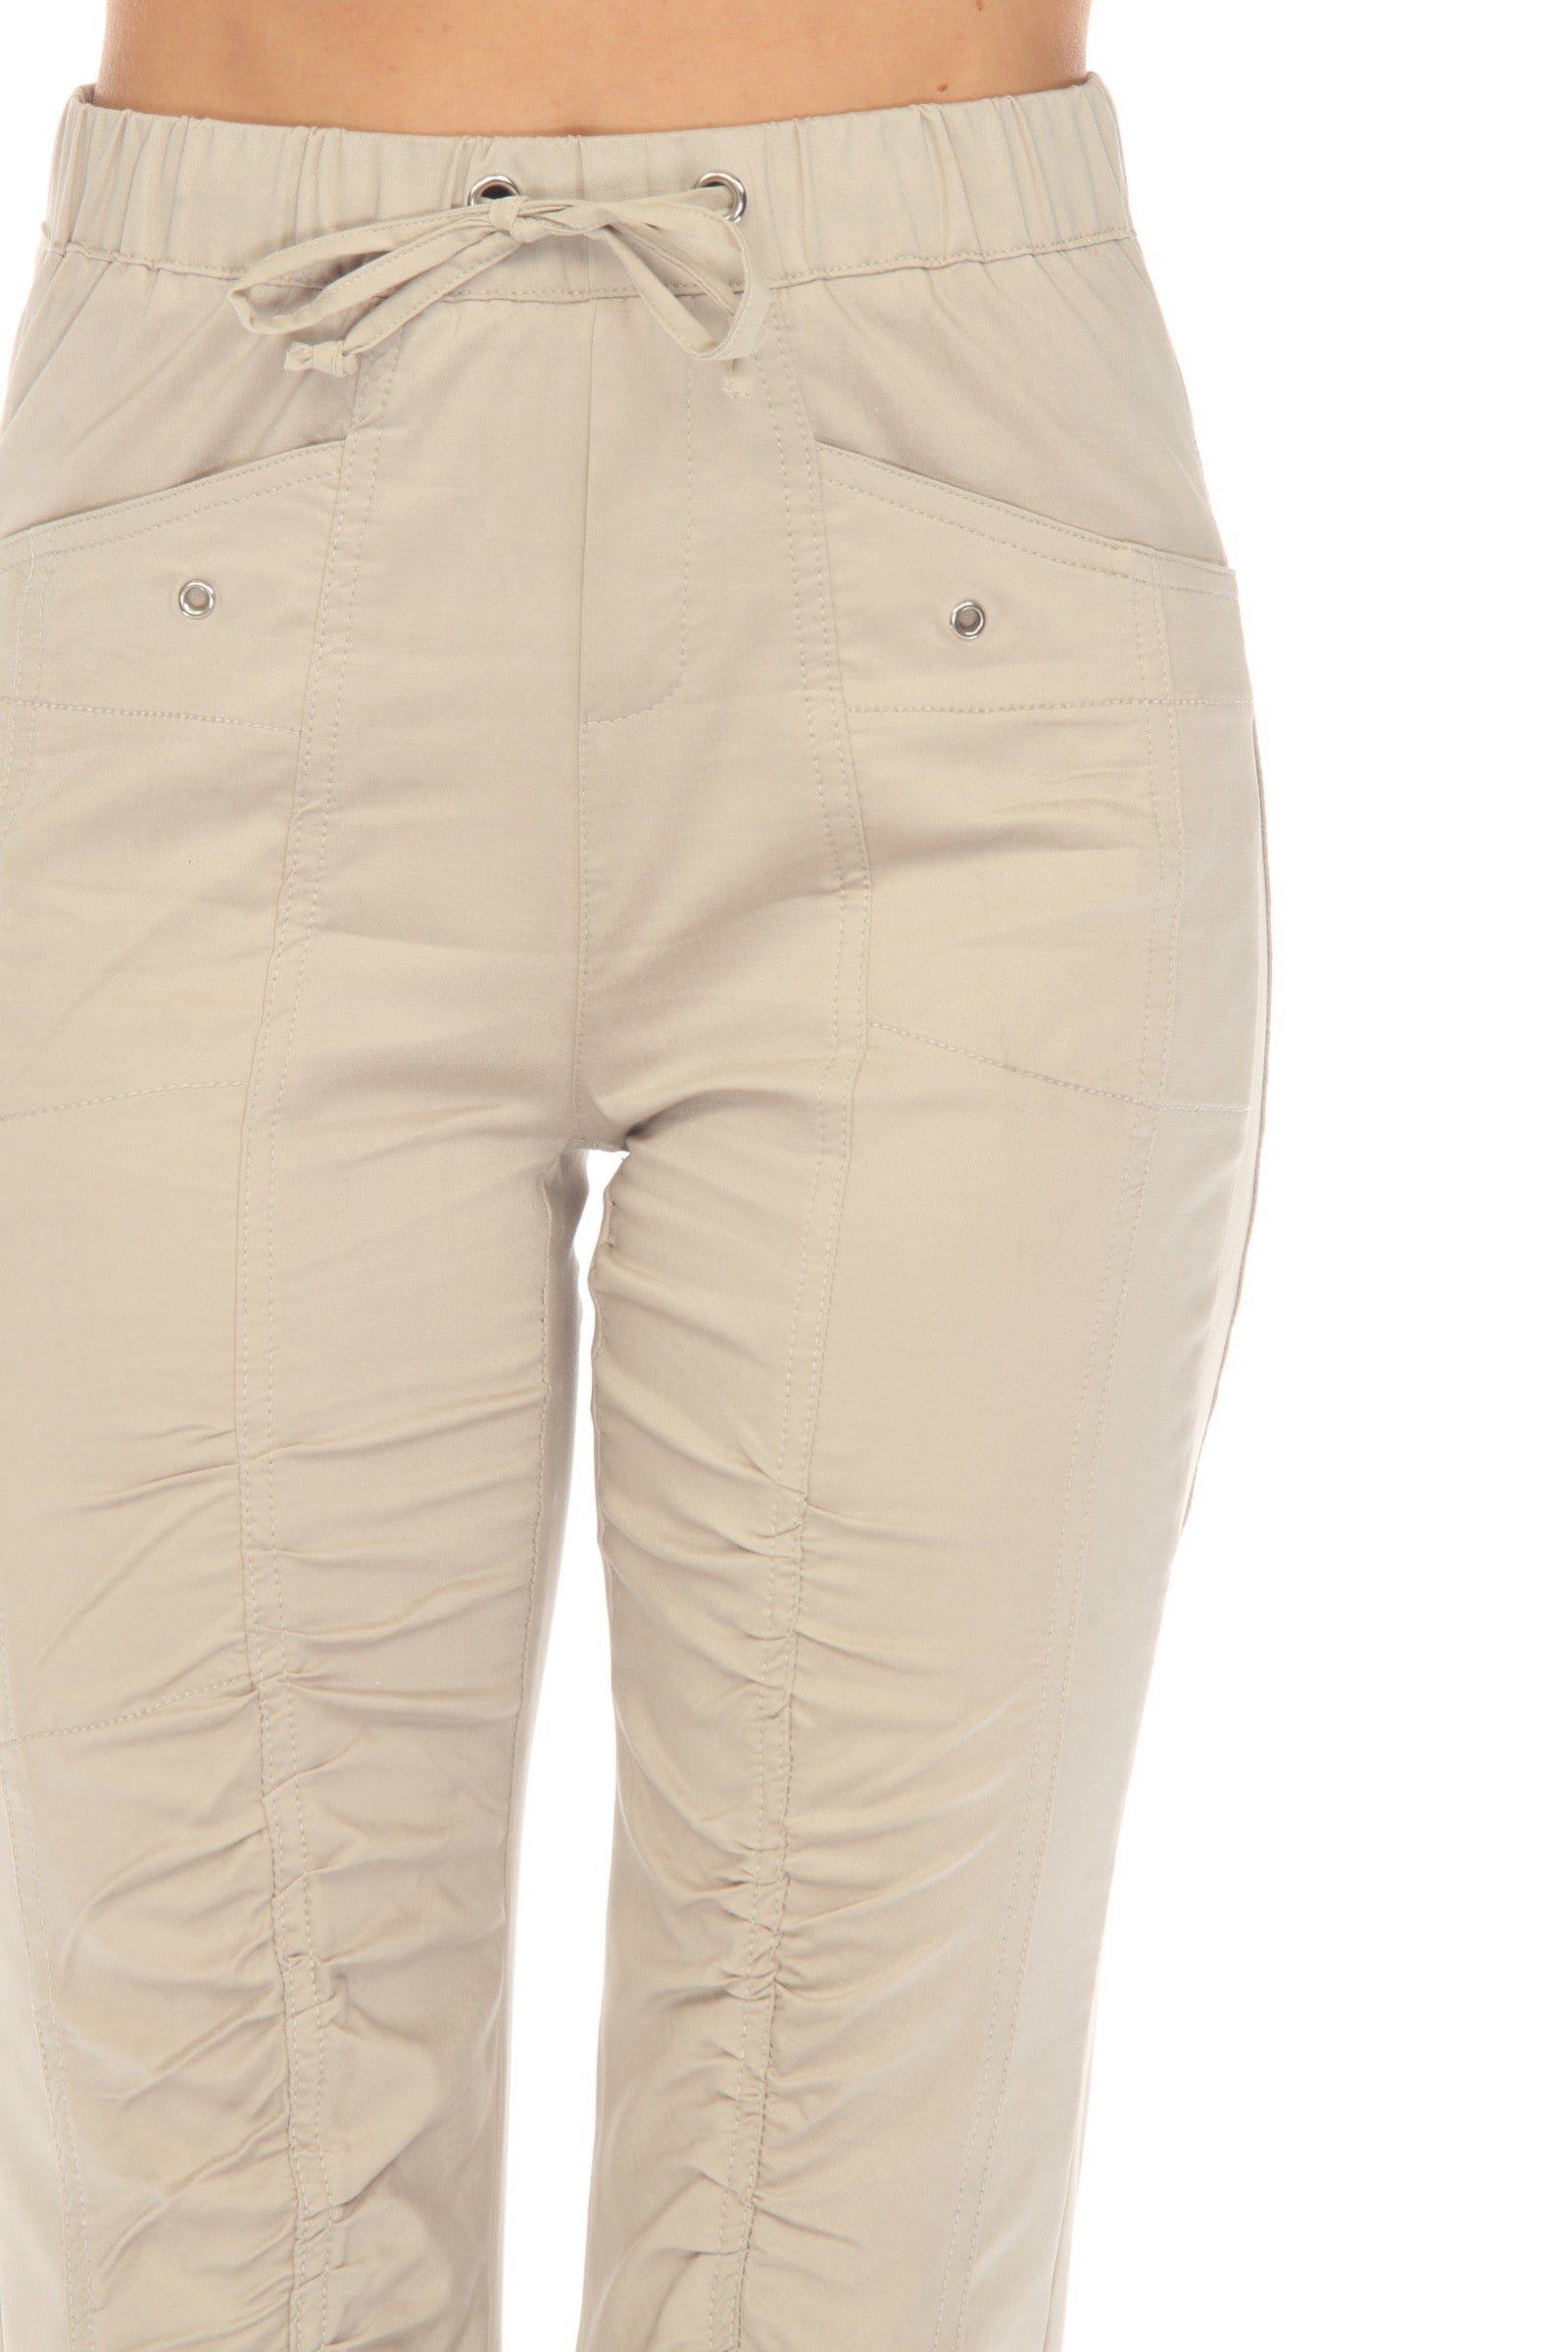 Ruched Scallop Cargo Pant - CARINE